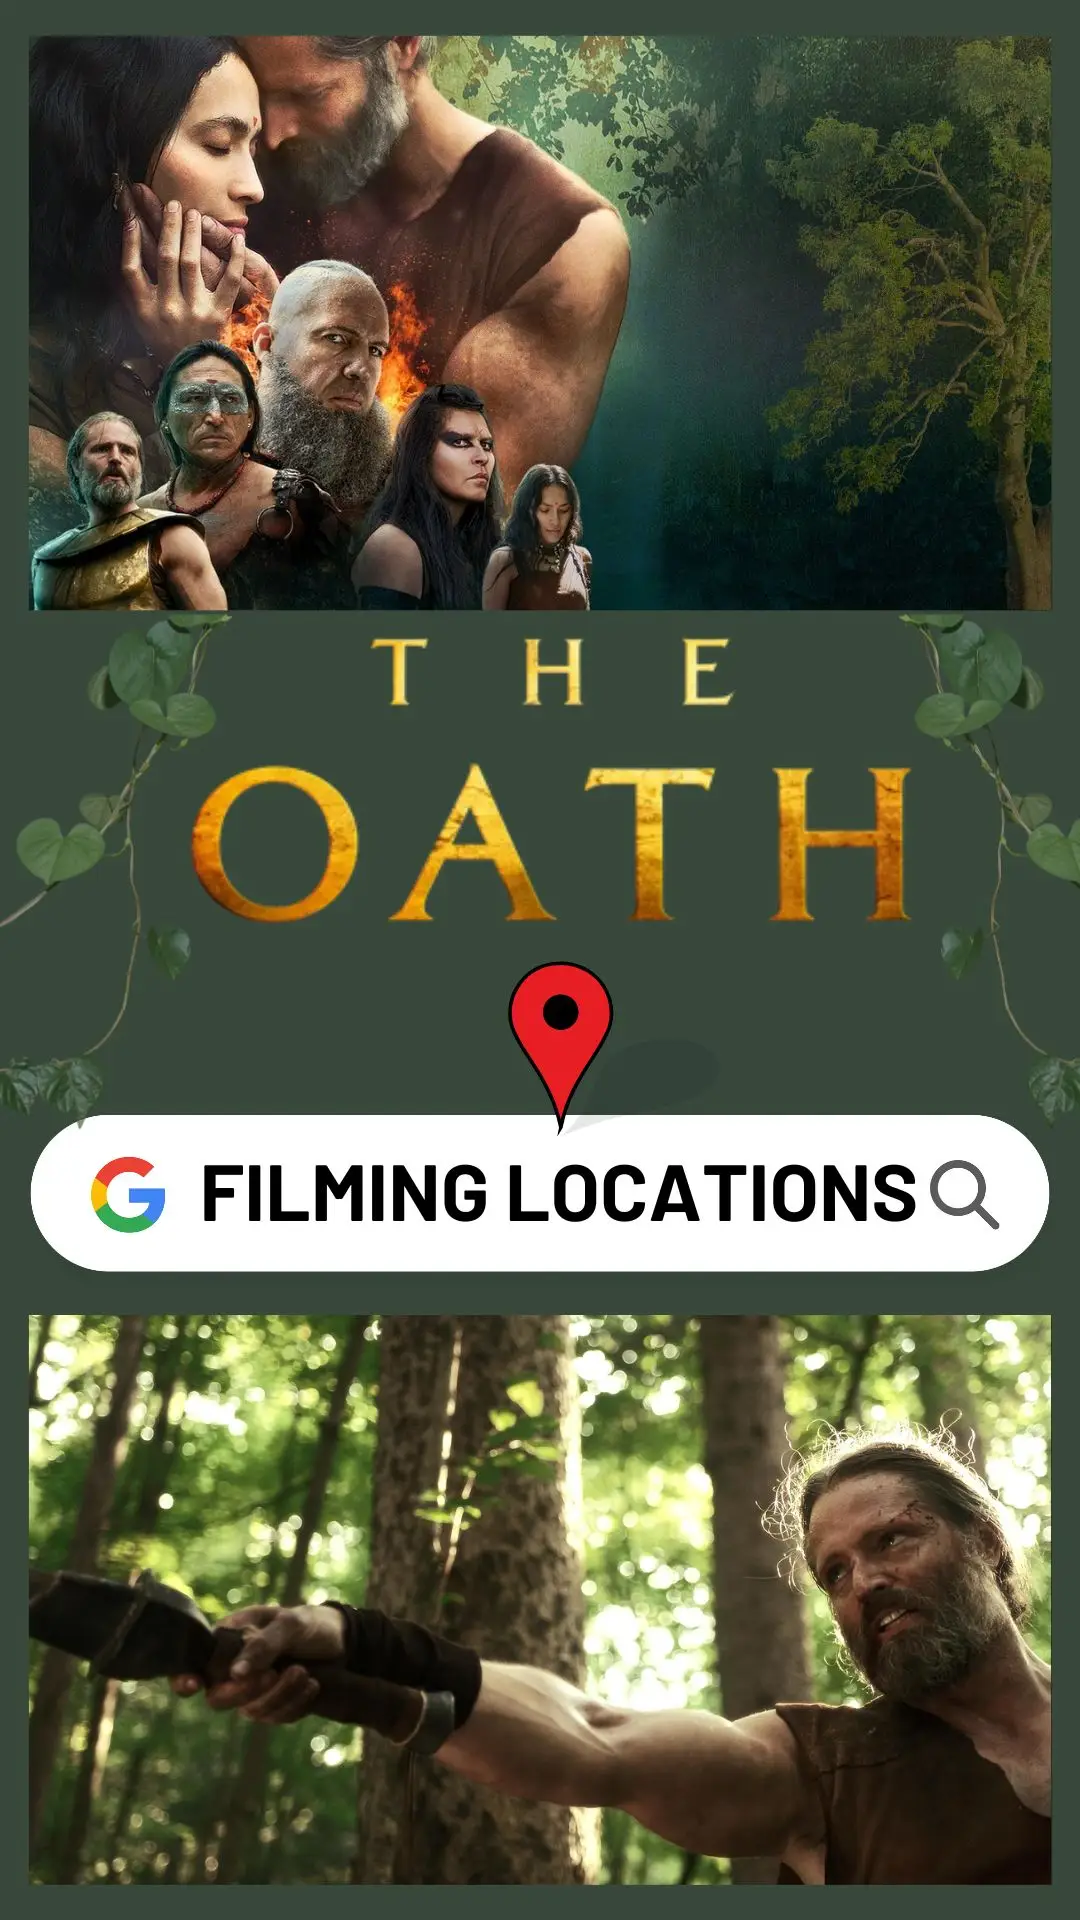 The Oath Filming Locations